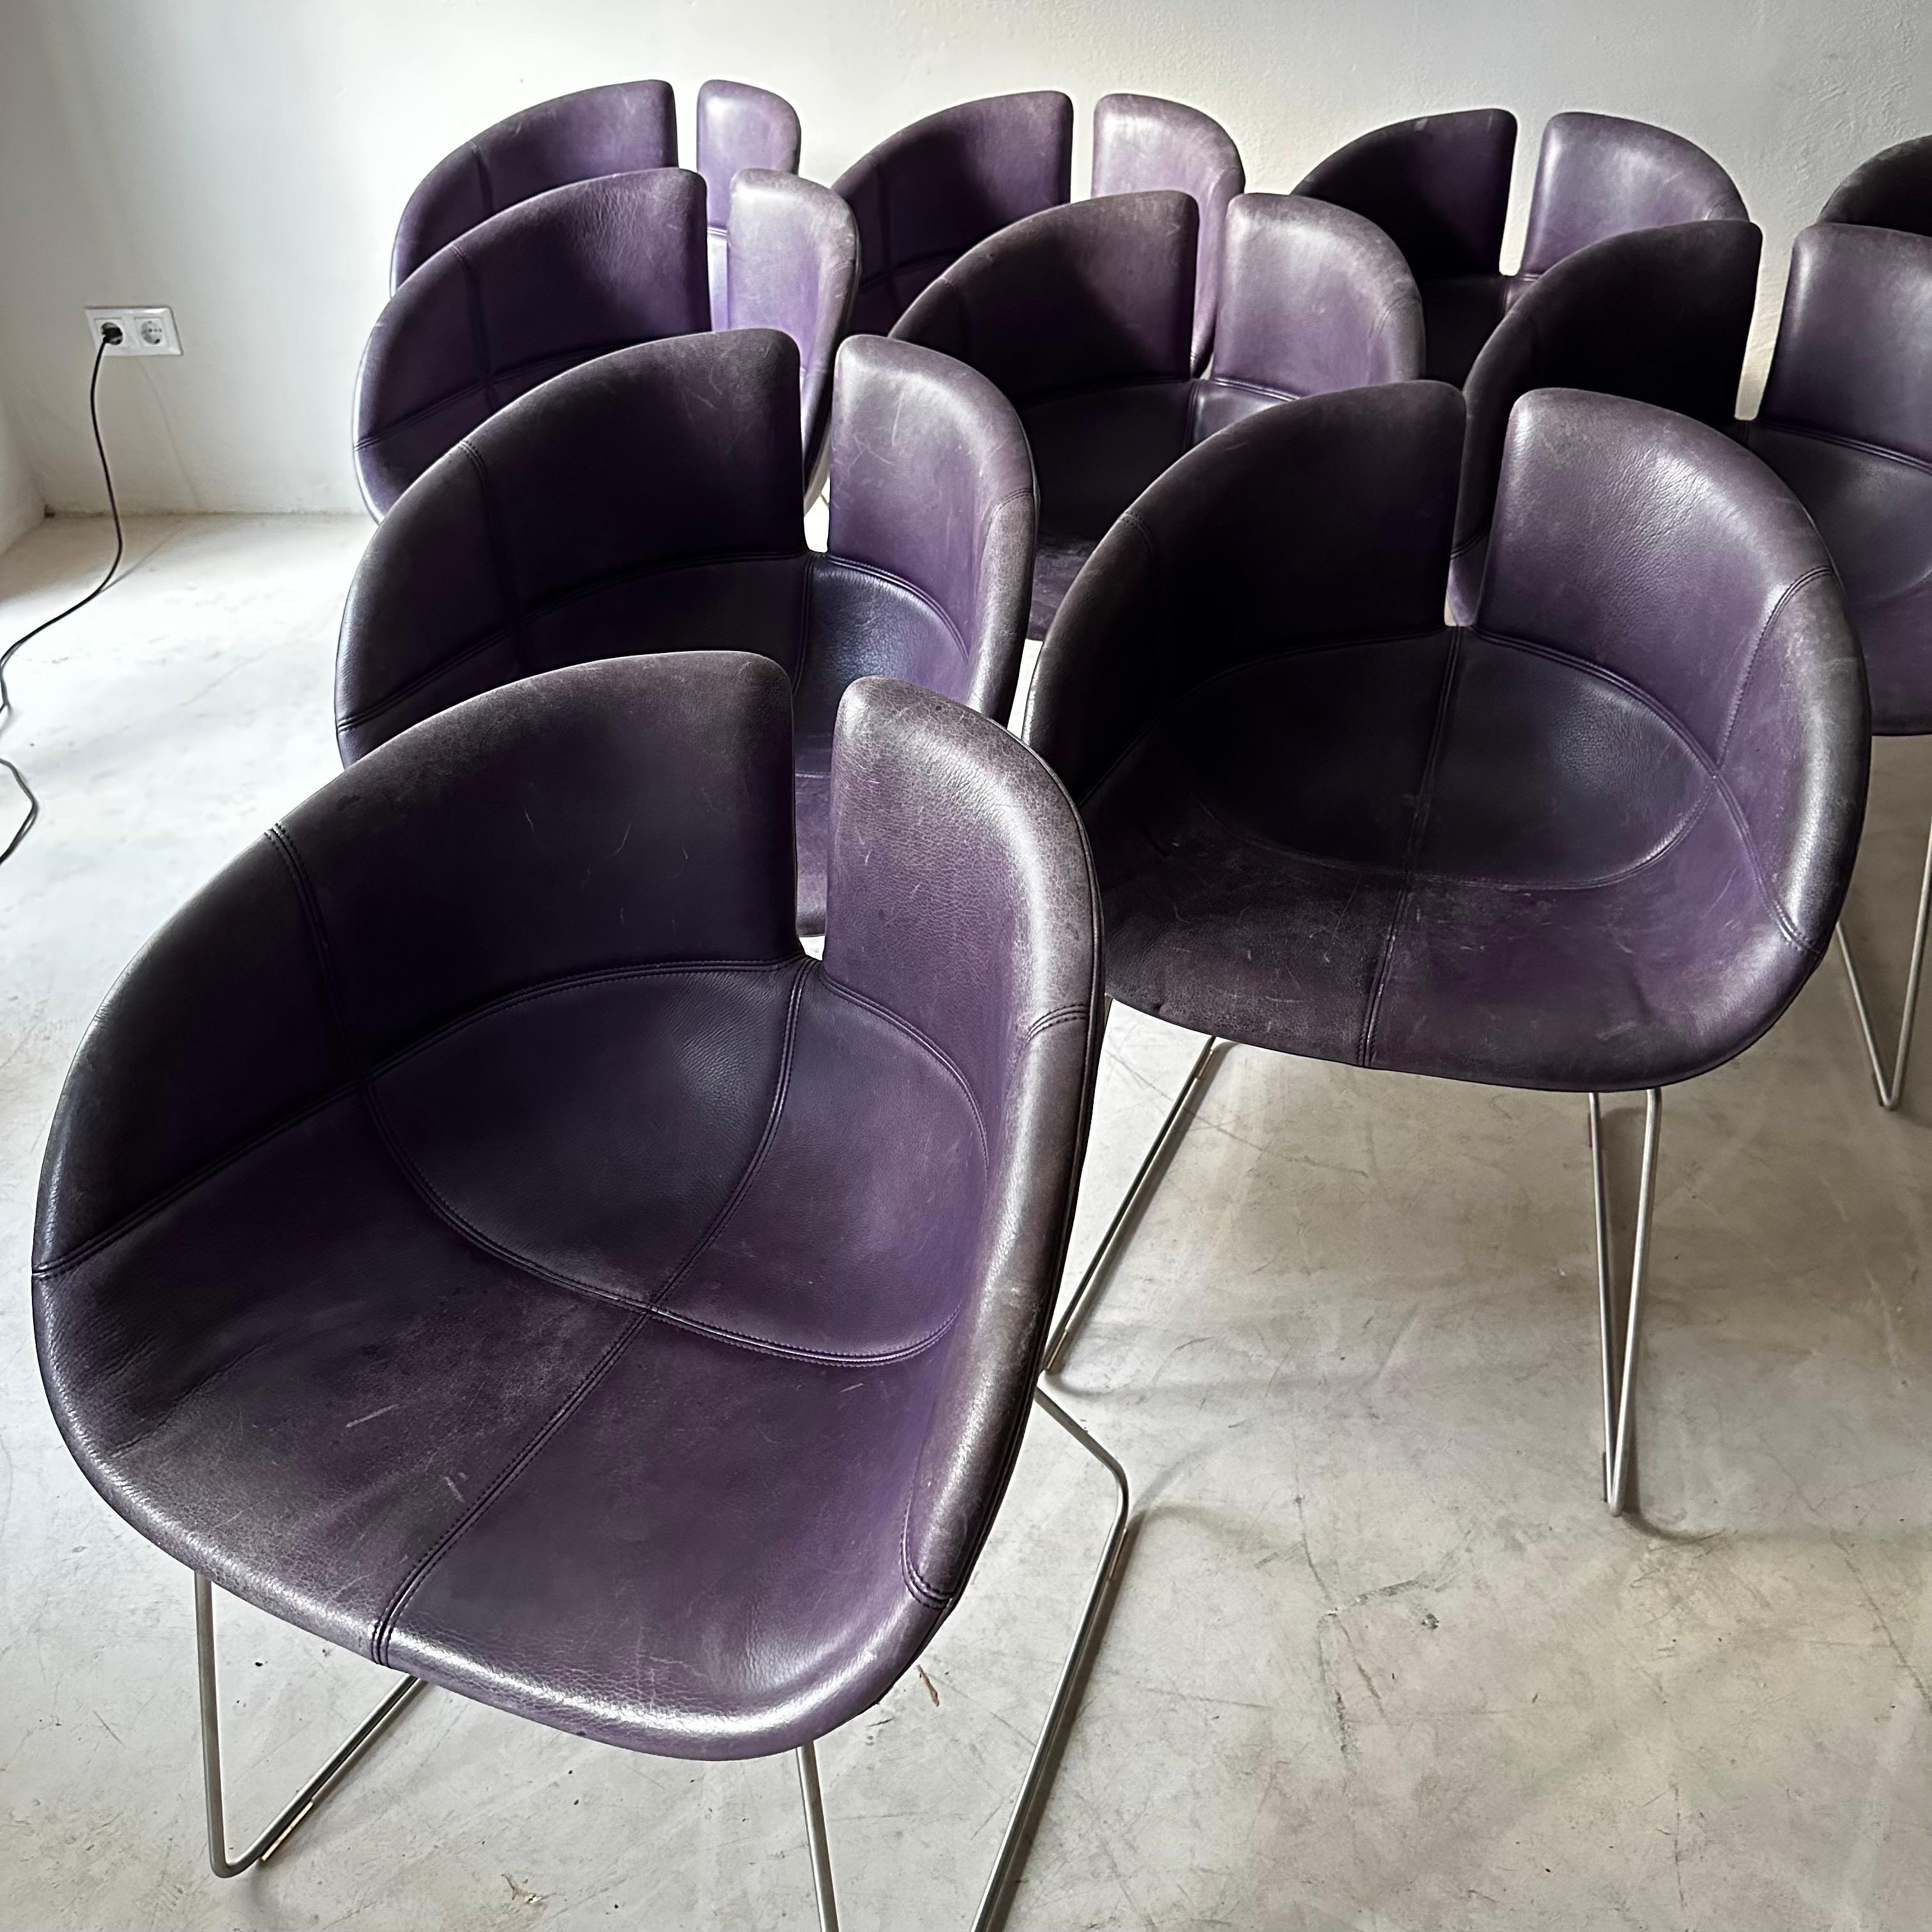 Contemporary Set of 12 Moroso Dining Chairs in Purple Leather by Patricia Urquiola 2002 For Sale